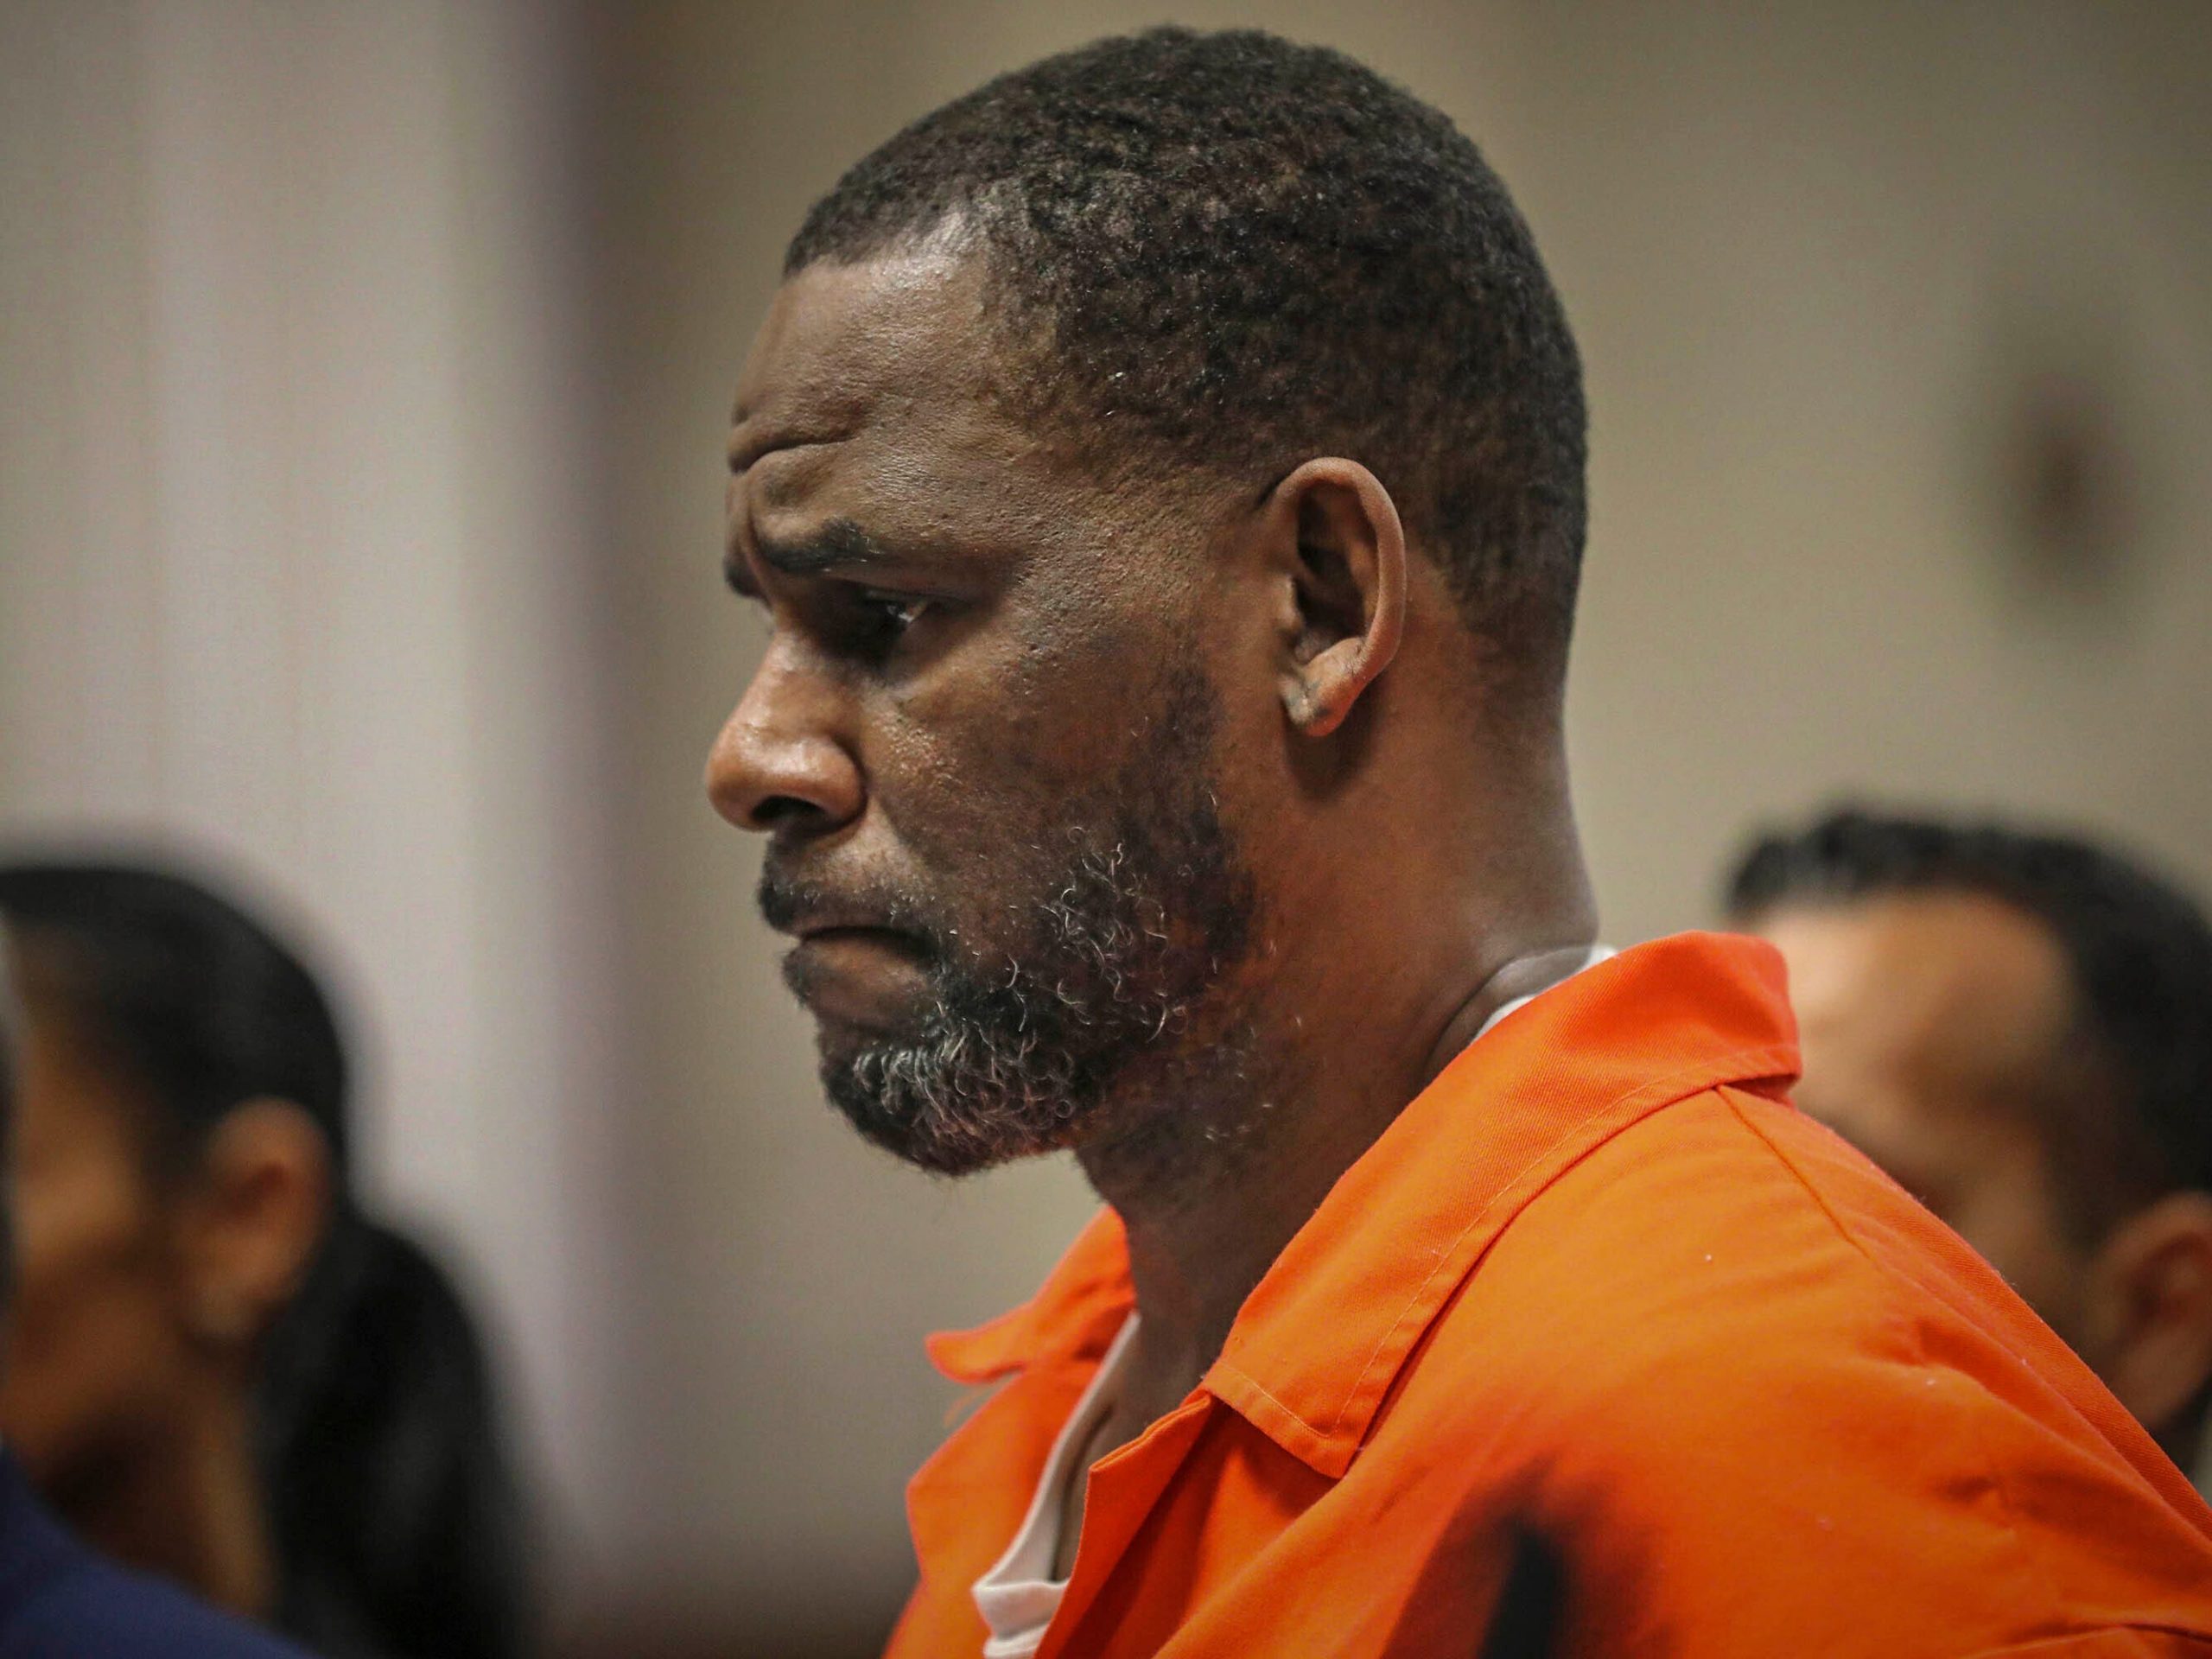 R. Kelly appears in court in Chicago in 2019.